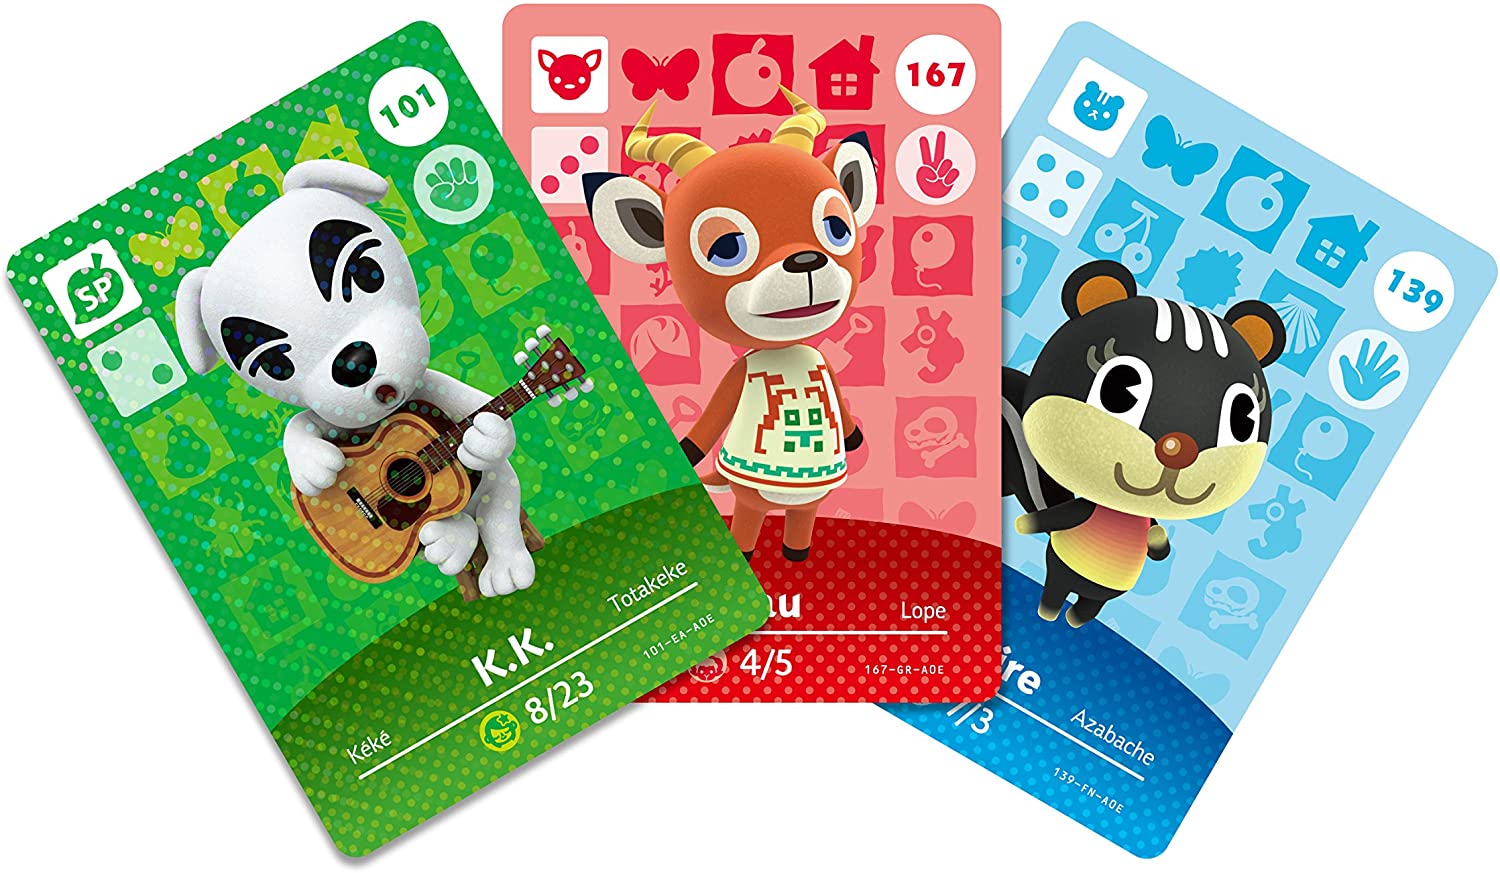 Nintendo Animal Crossing Amiibo Cards Series 2 for Nintendo Wii U and 3DS, 1-Pack (6 Cards/Pack) - Pro-Distributing